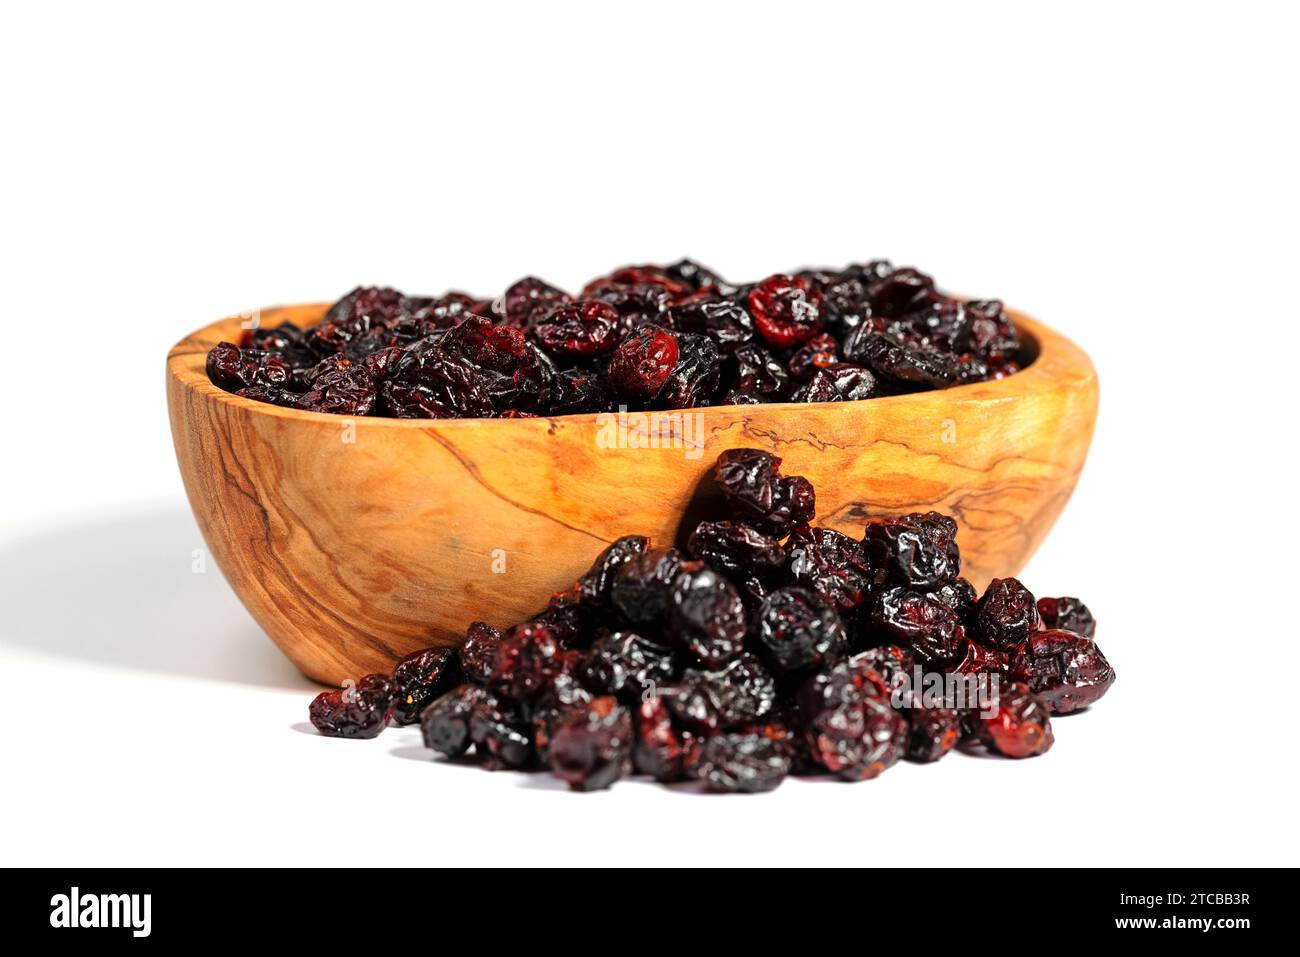 Dried cranberries in a wooden bowl Stock Photo